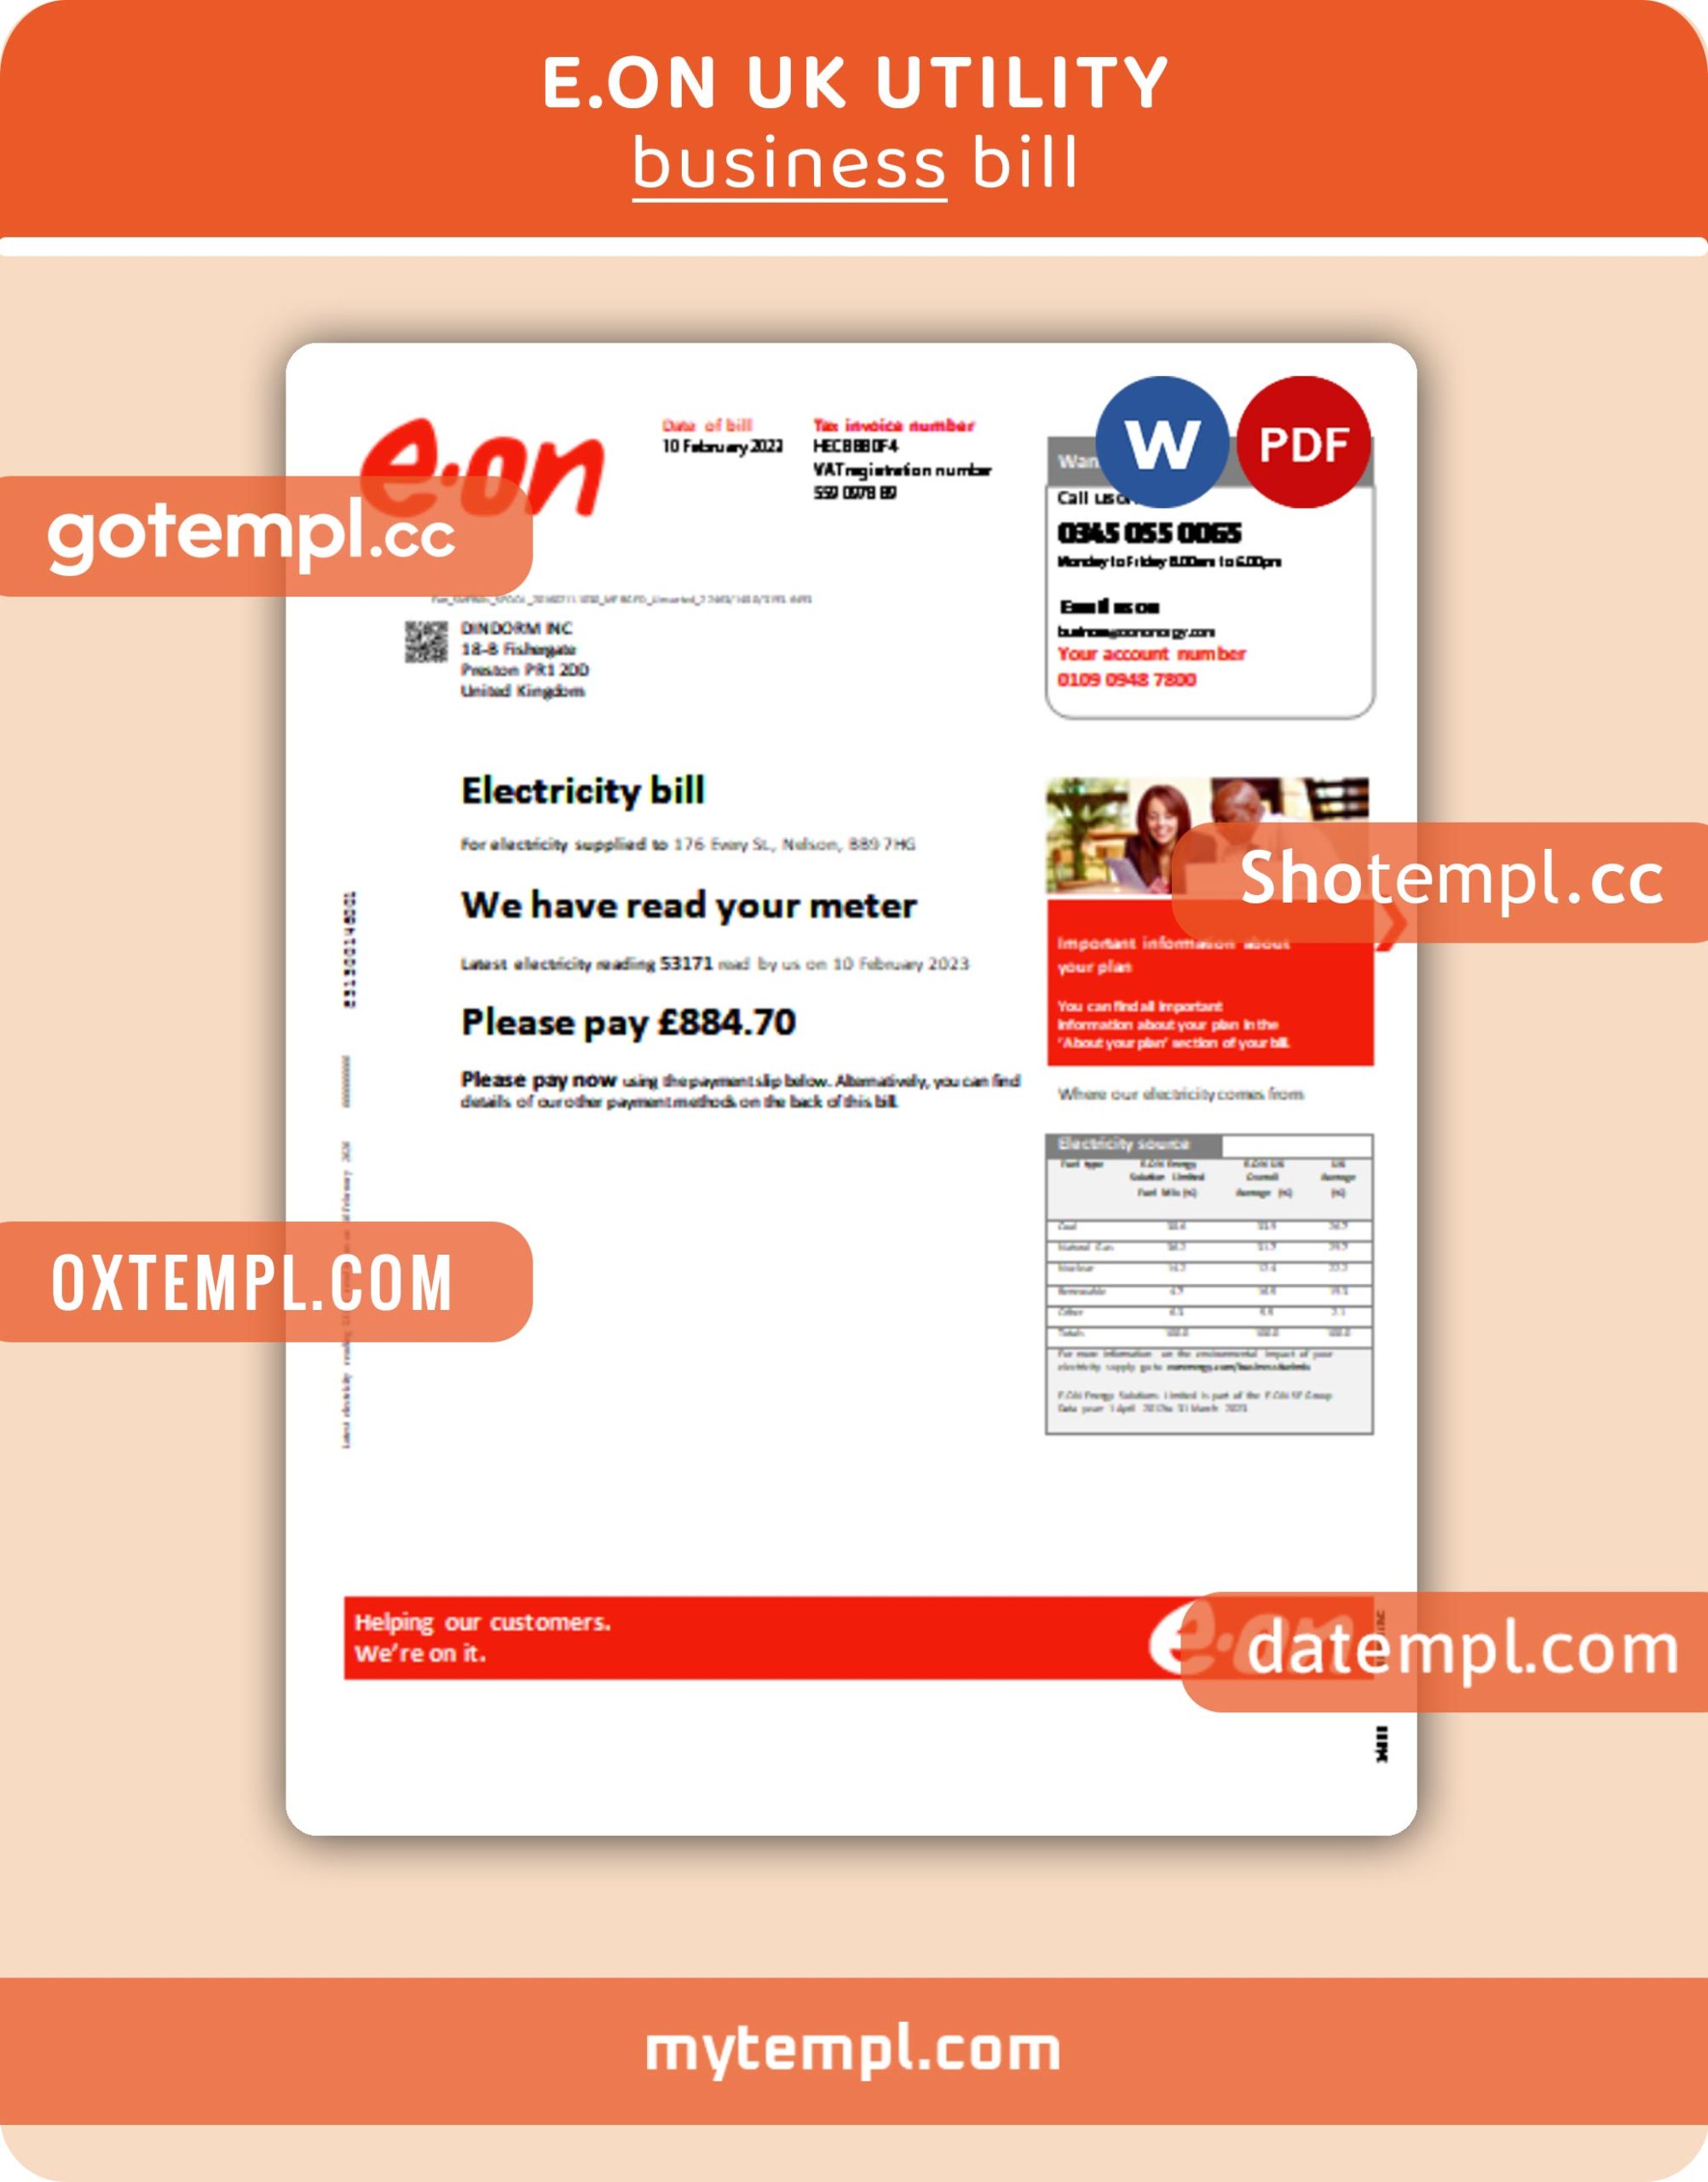 E.ON UK electricity business utility bill, Word and PDF template